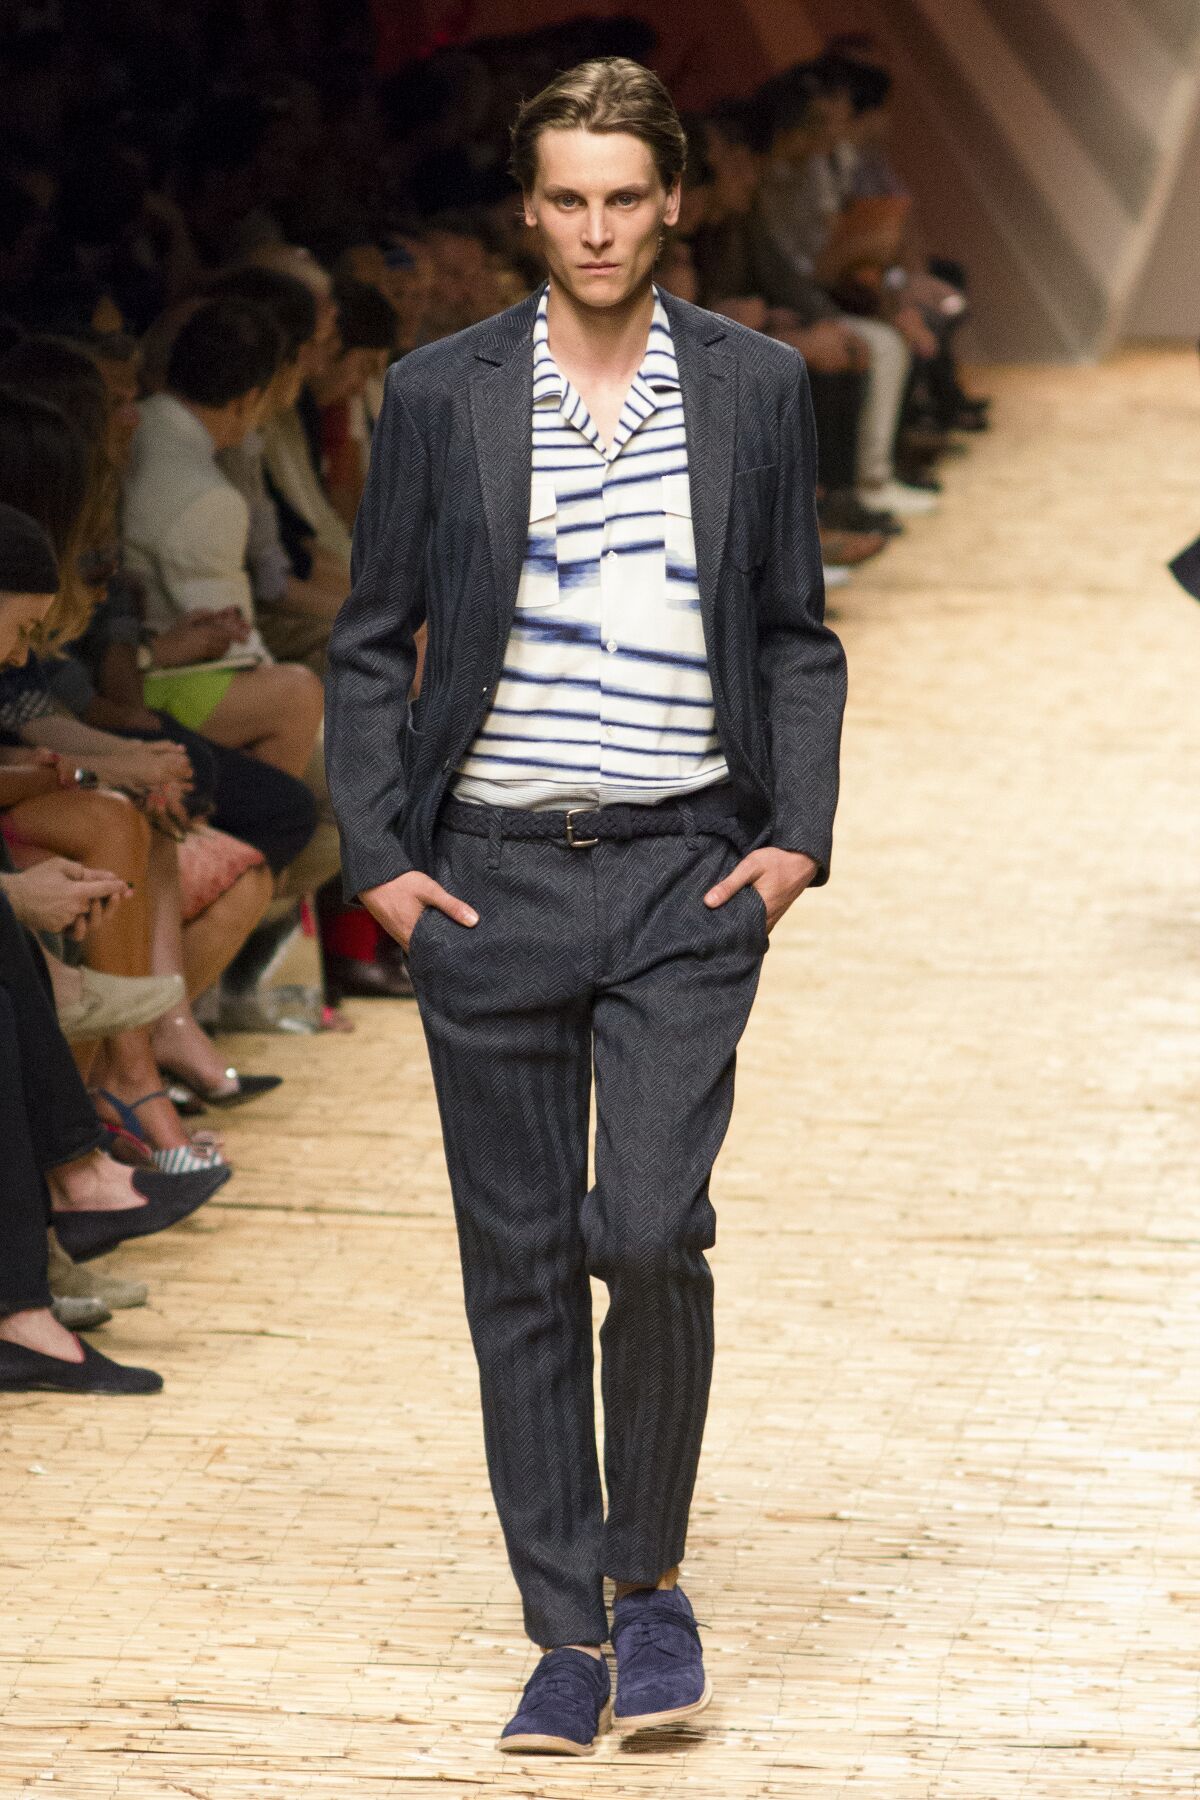 MISSONI SPRING SUMMER 2014 MEN’S COLLECTION | The Skinny Beep